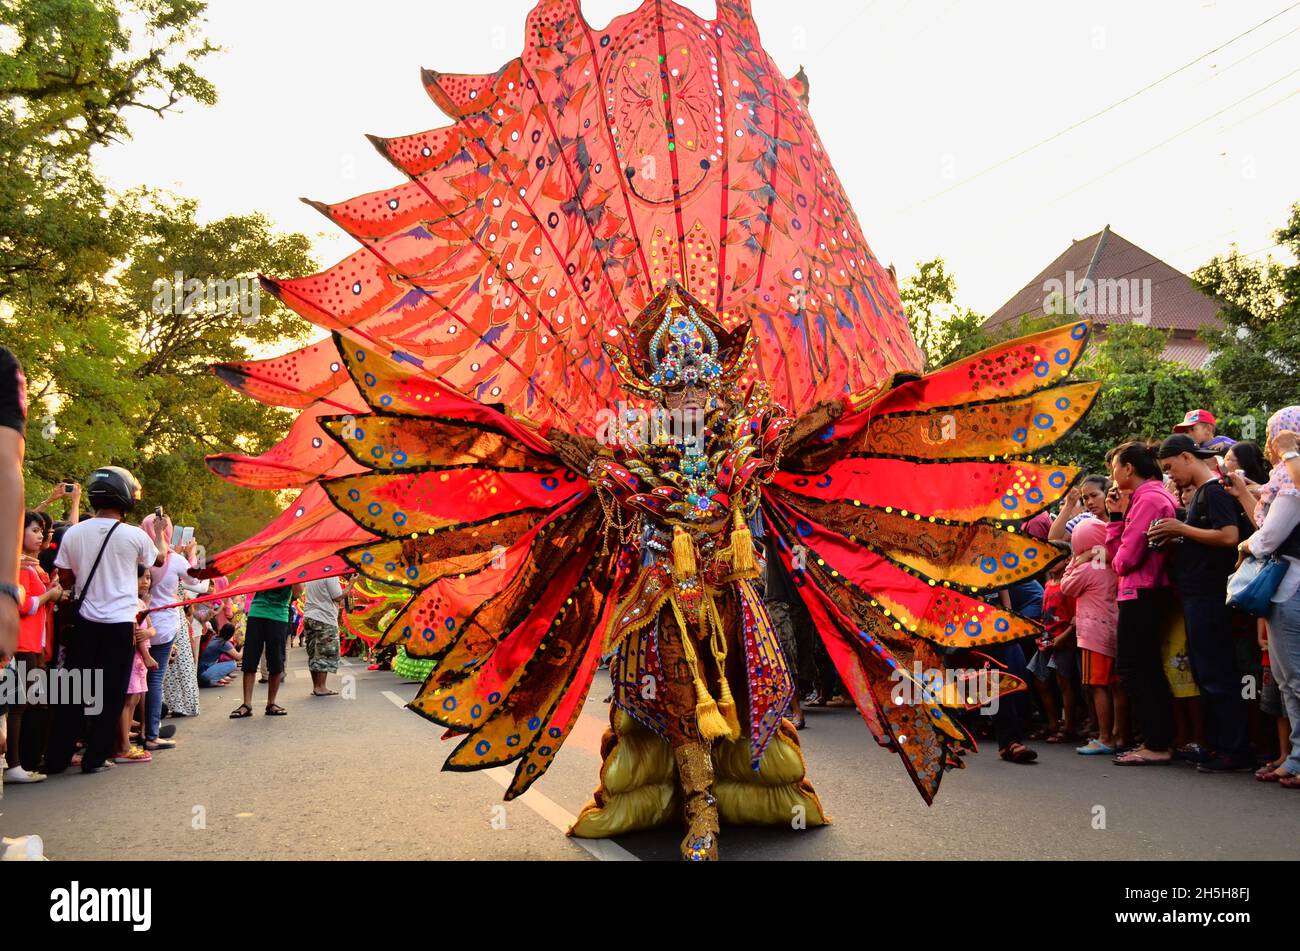 a woman wearing a costume at a carnival batik solo, surakarta, central java, indonesia. Stock Photo